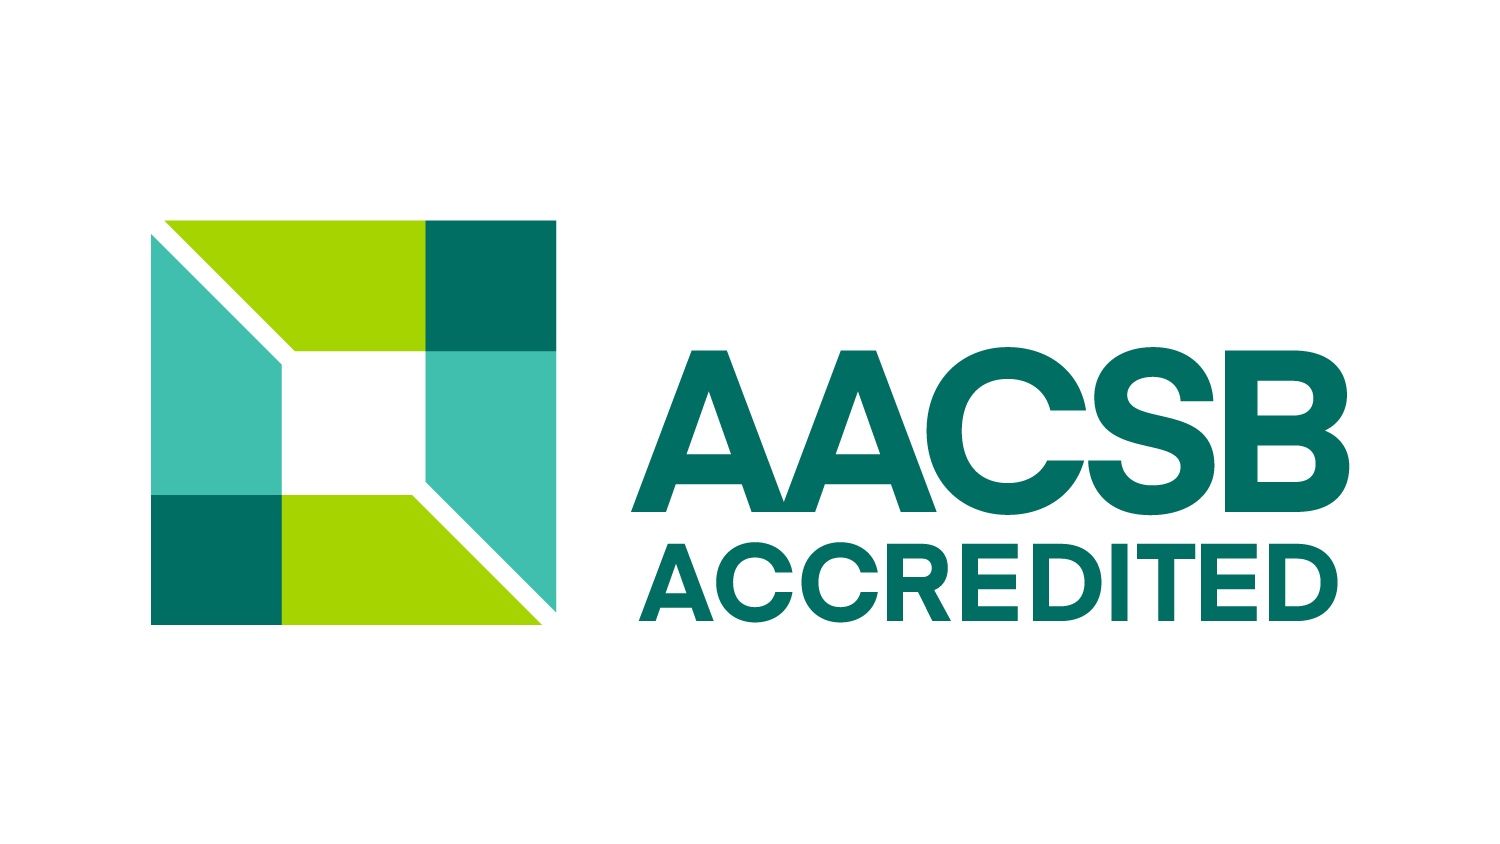 Picture with the AACSB logo with text that says AACSB accredited